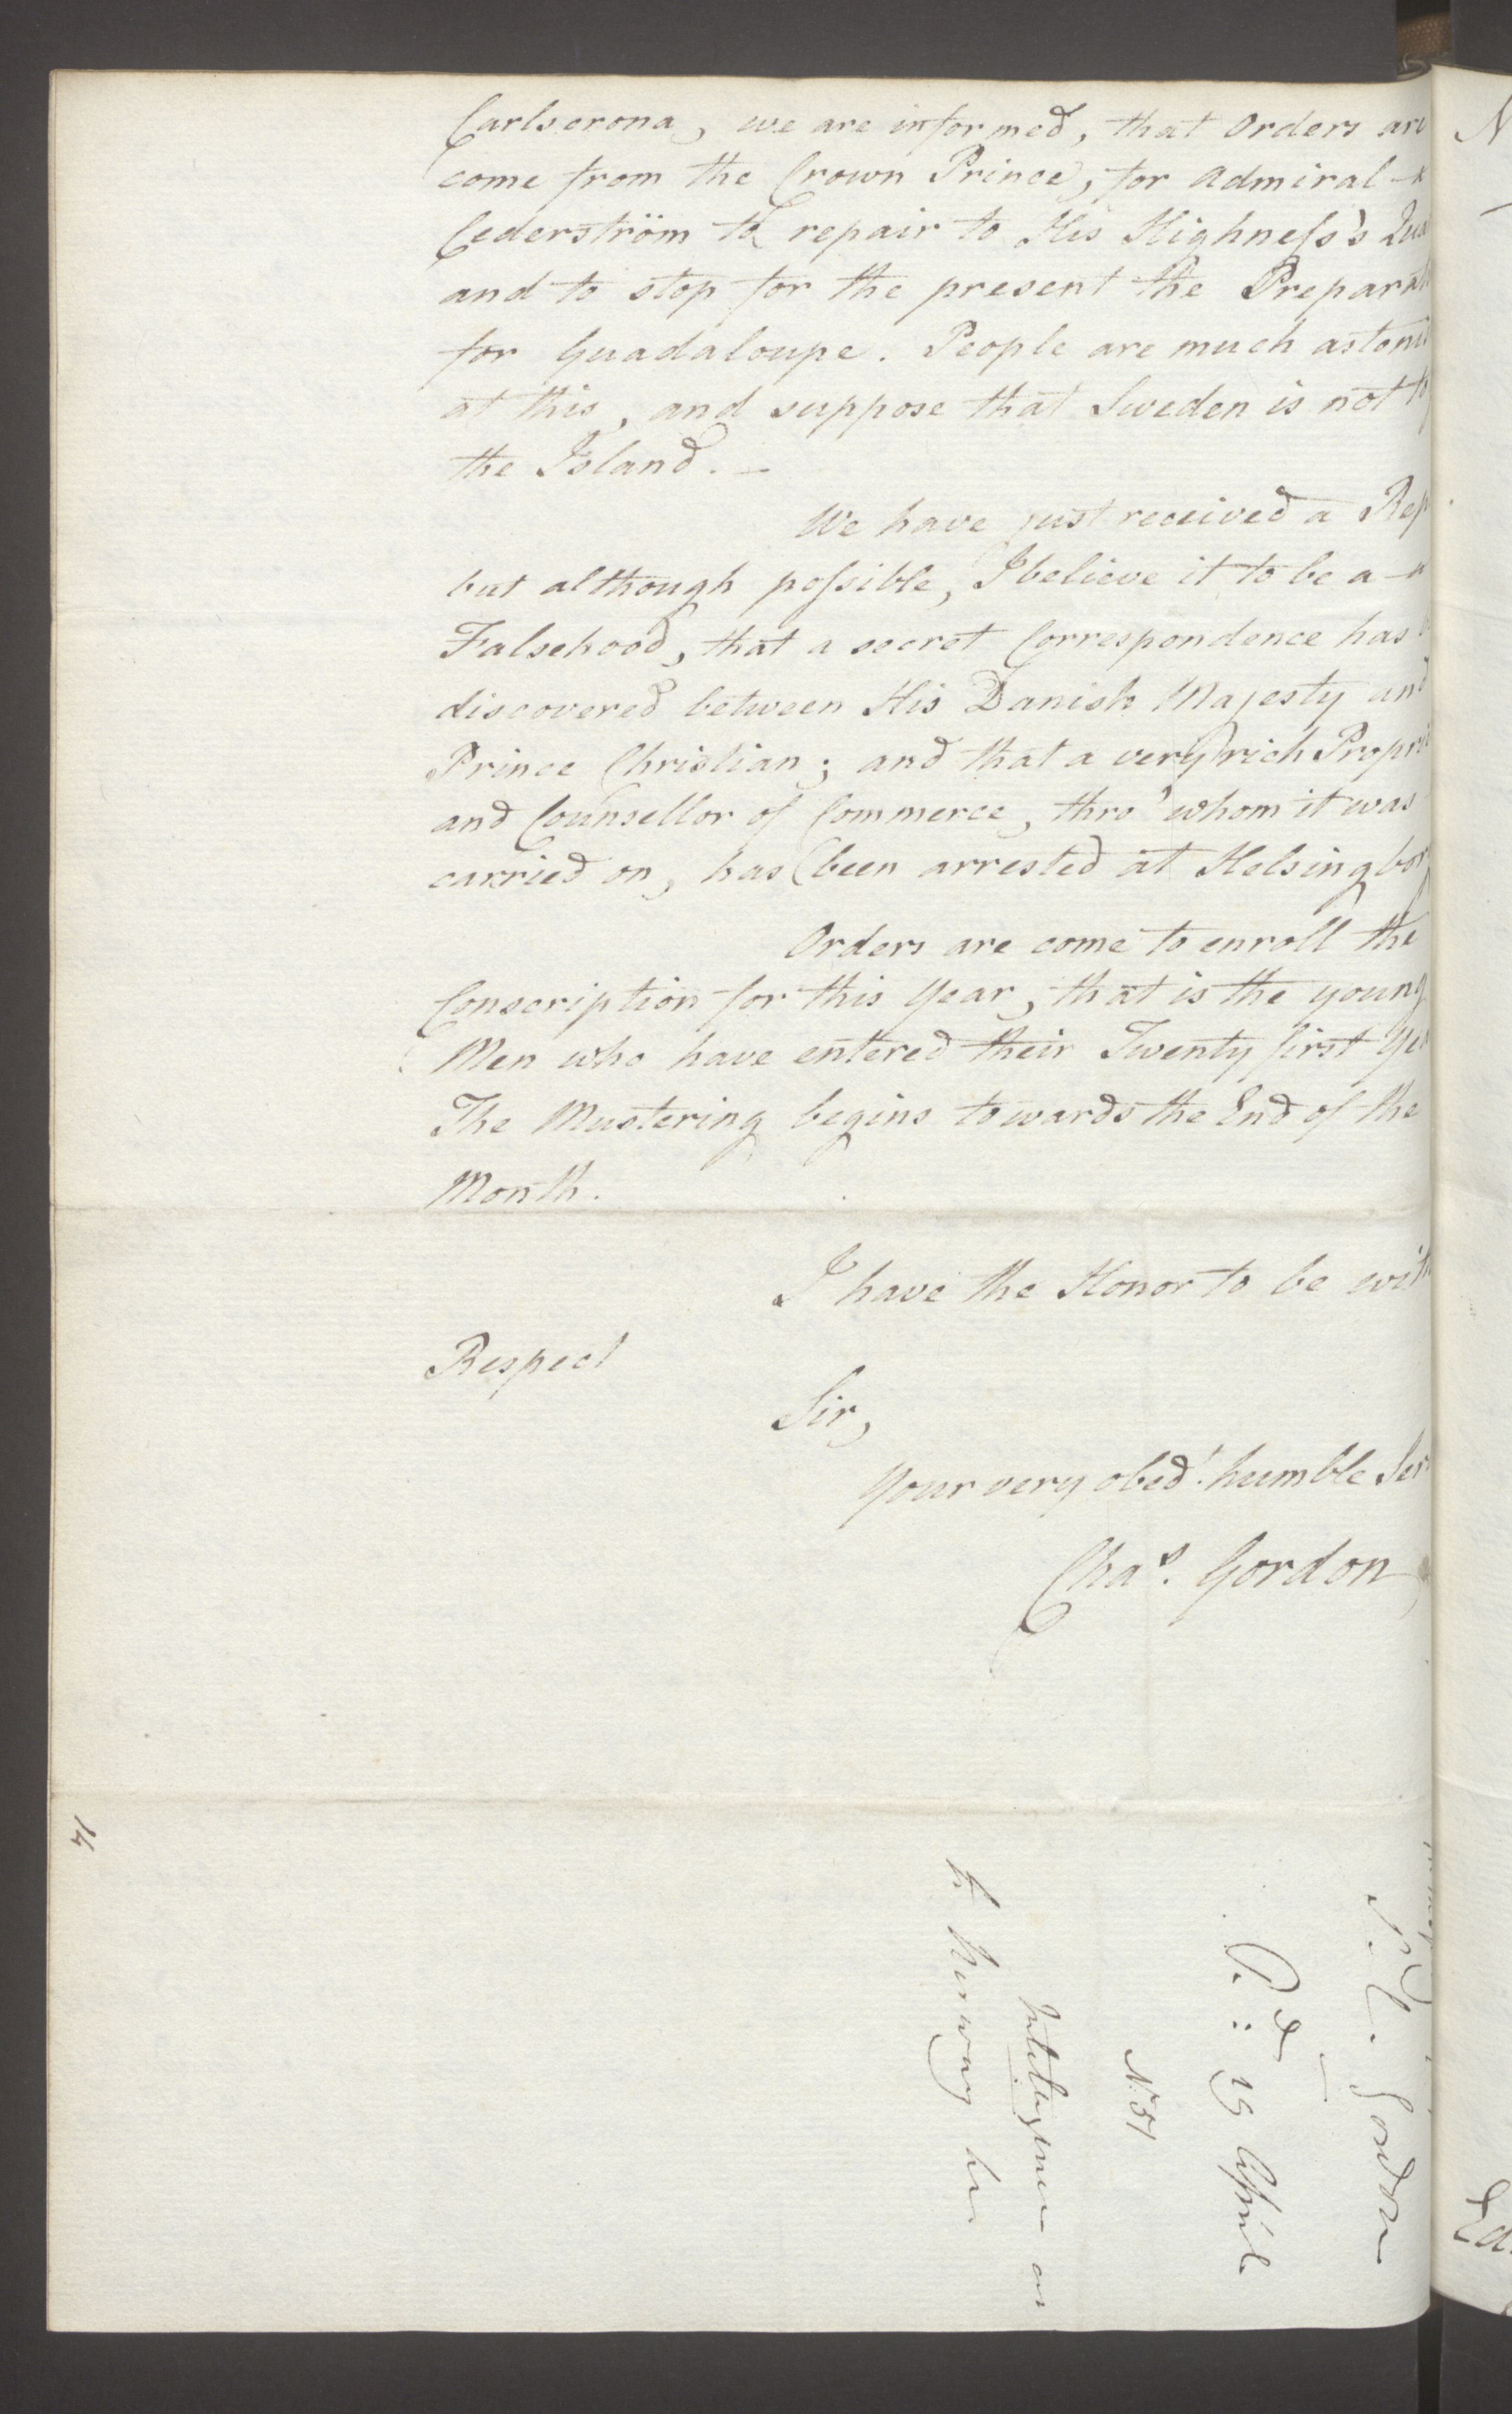 Foreign Office*, UKA/-/FO 38/16: Sir C. Gordon. Reports from Malmö, Jonkoping, and Helsingborg, 1814, s. 33